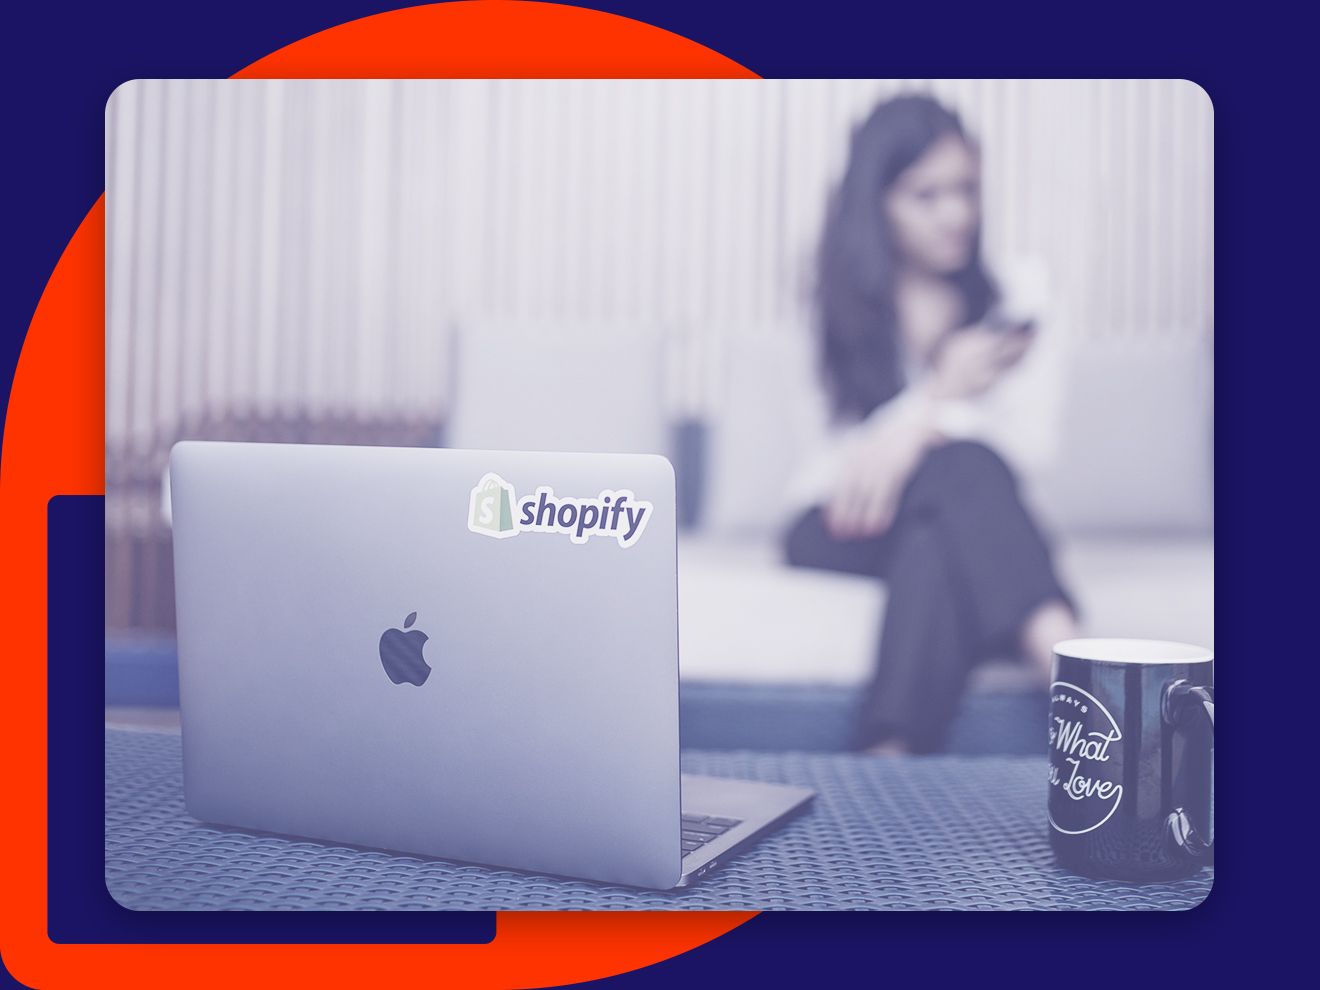 10 Best Shopify Apps For Dropshipping In 2021